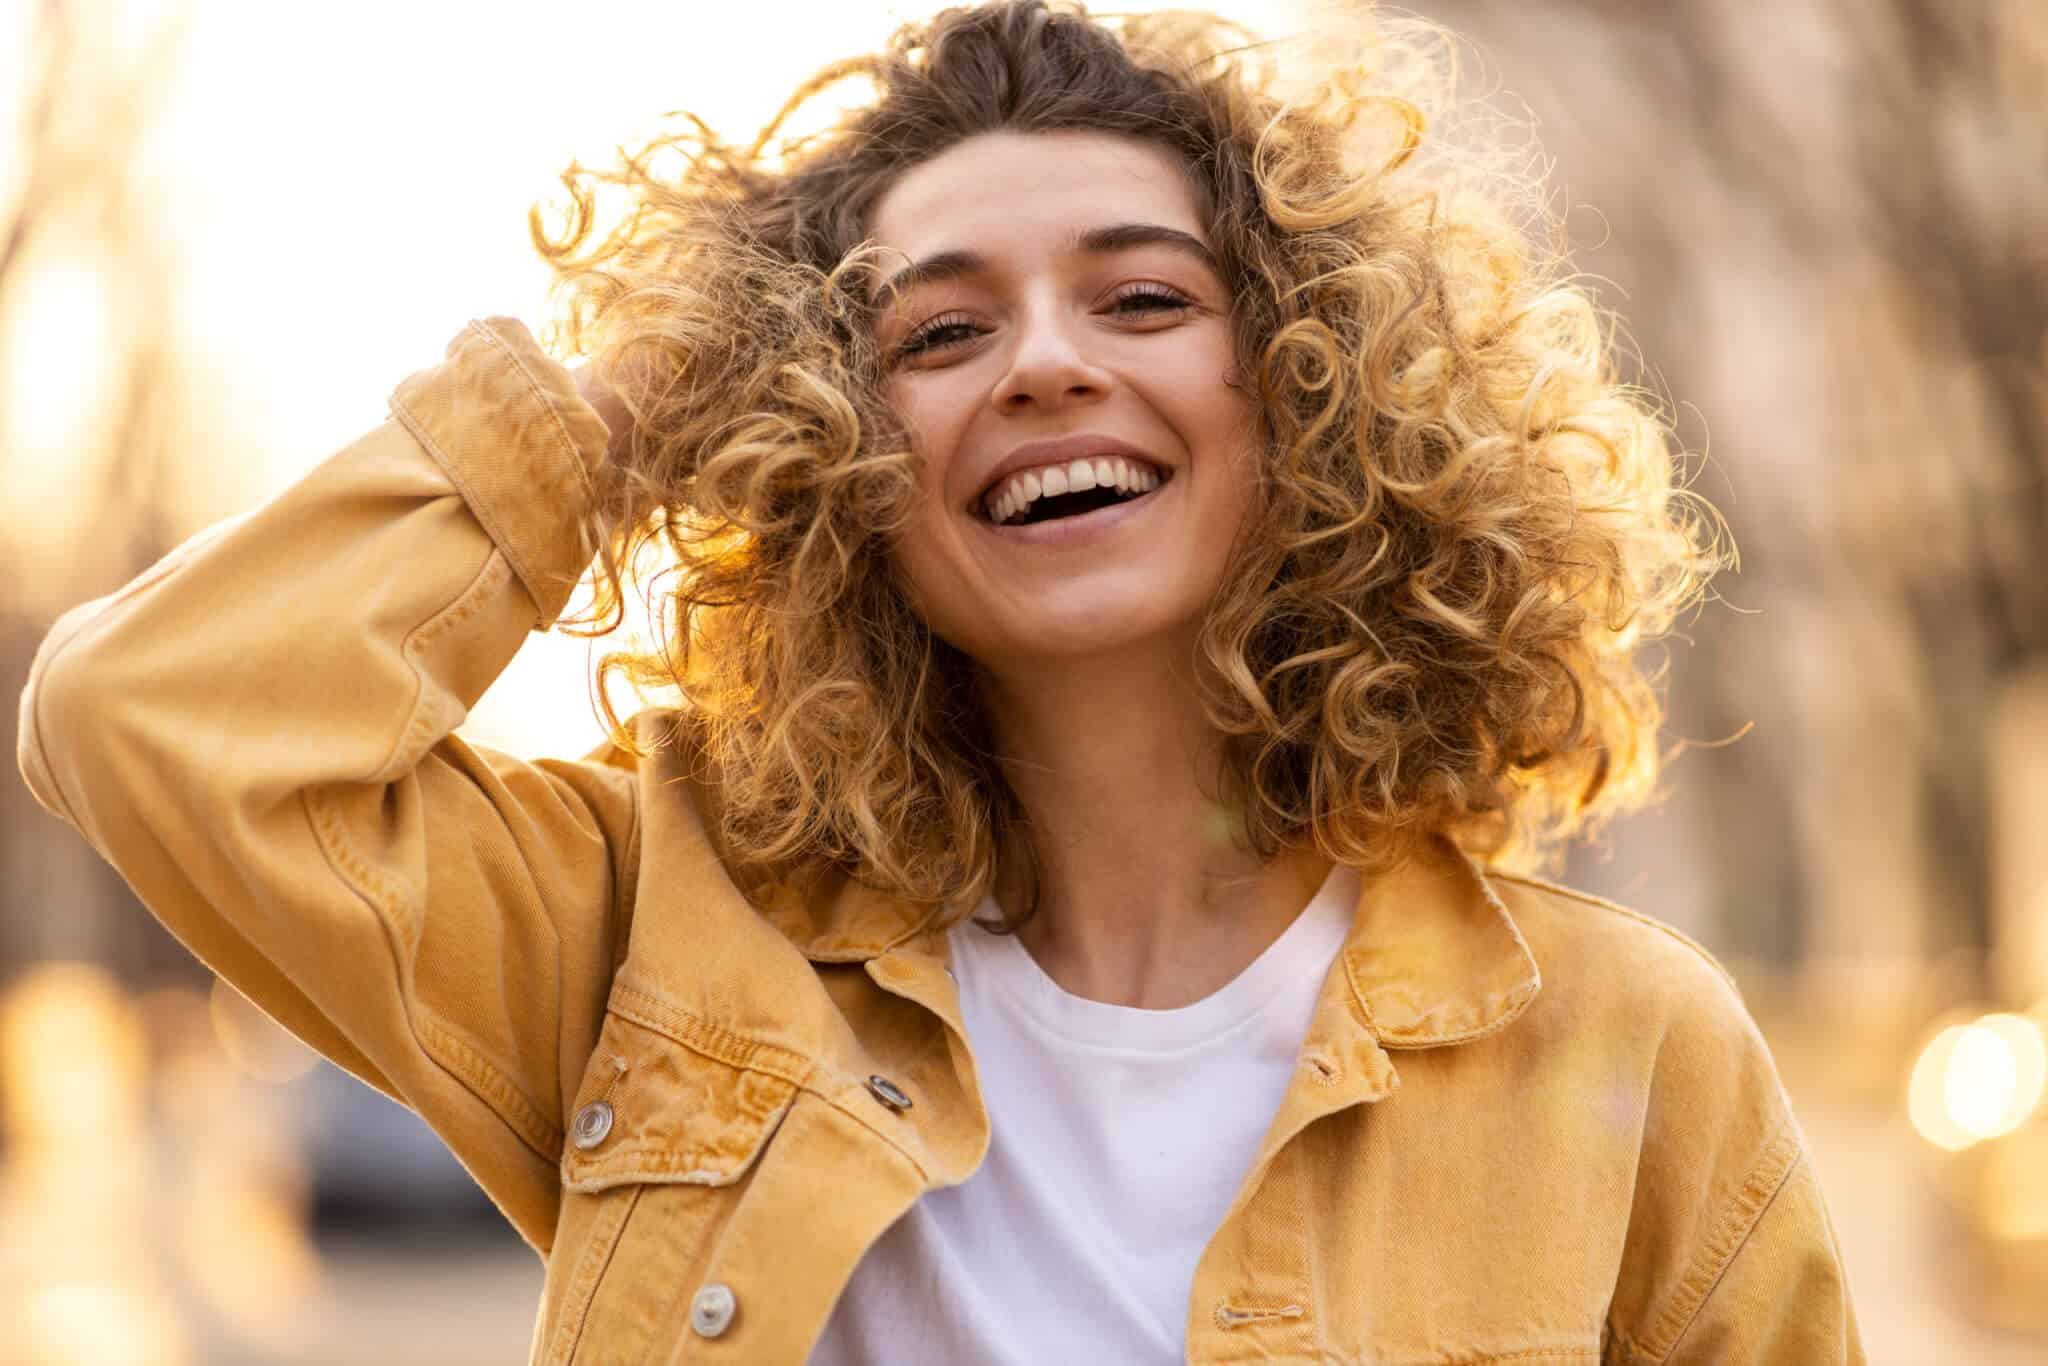 Woman with Curly Hair Moved by the Wind | Sheperd Integrative Dermatology in Mount Pleasant, SC